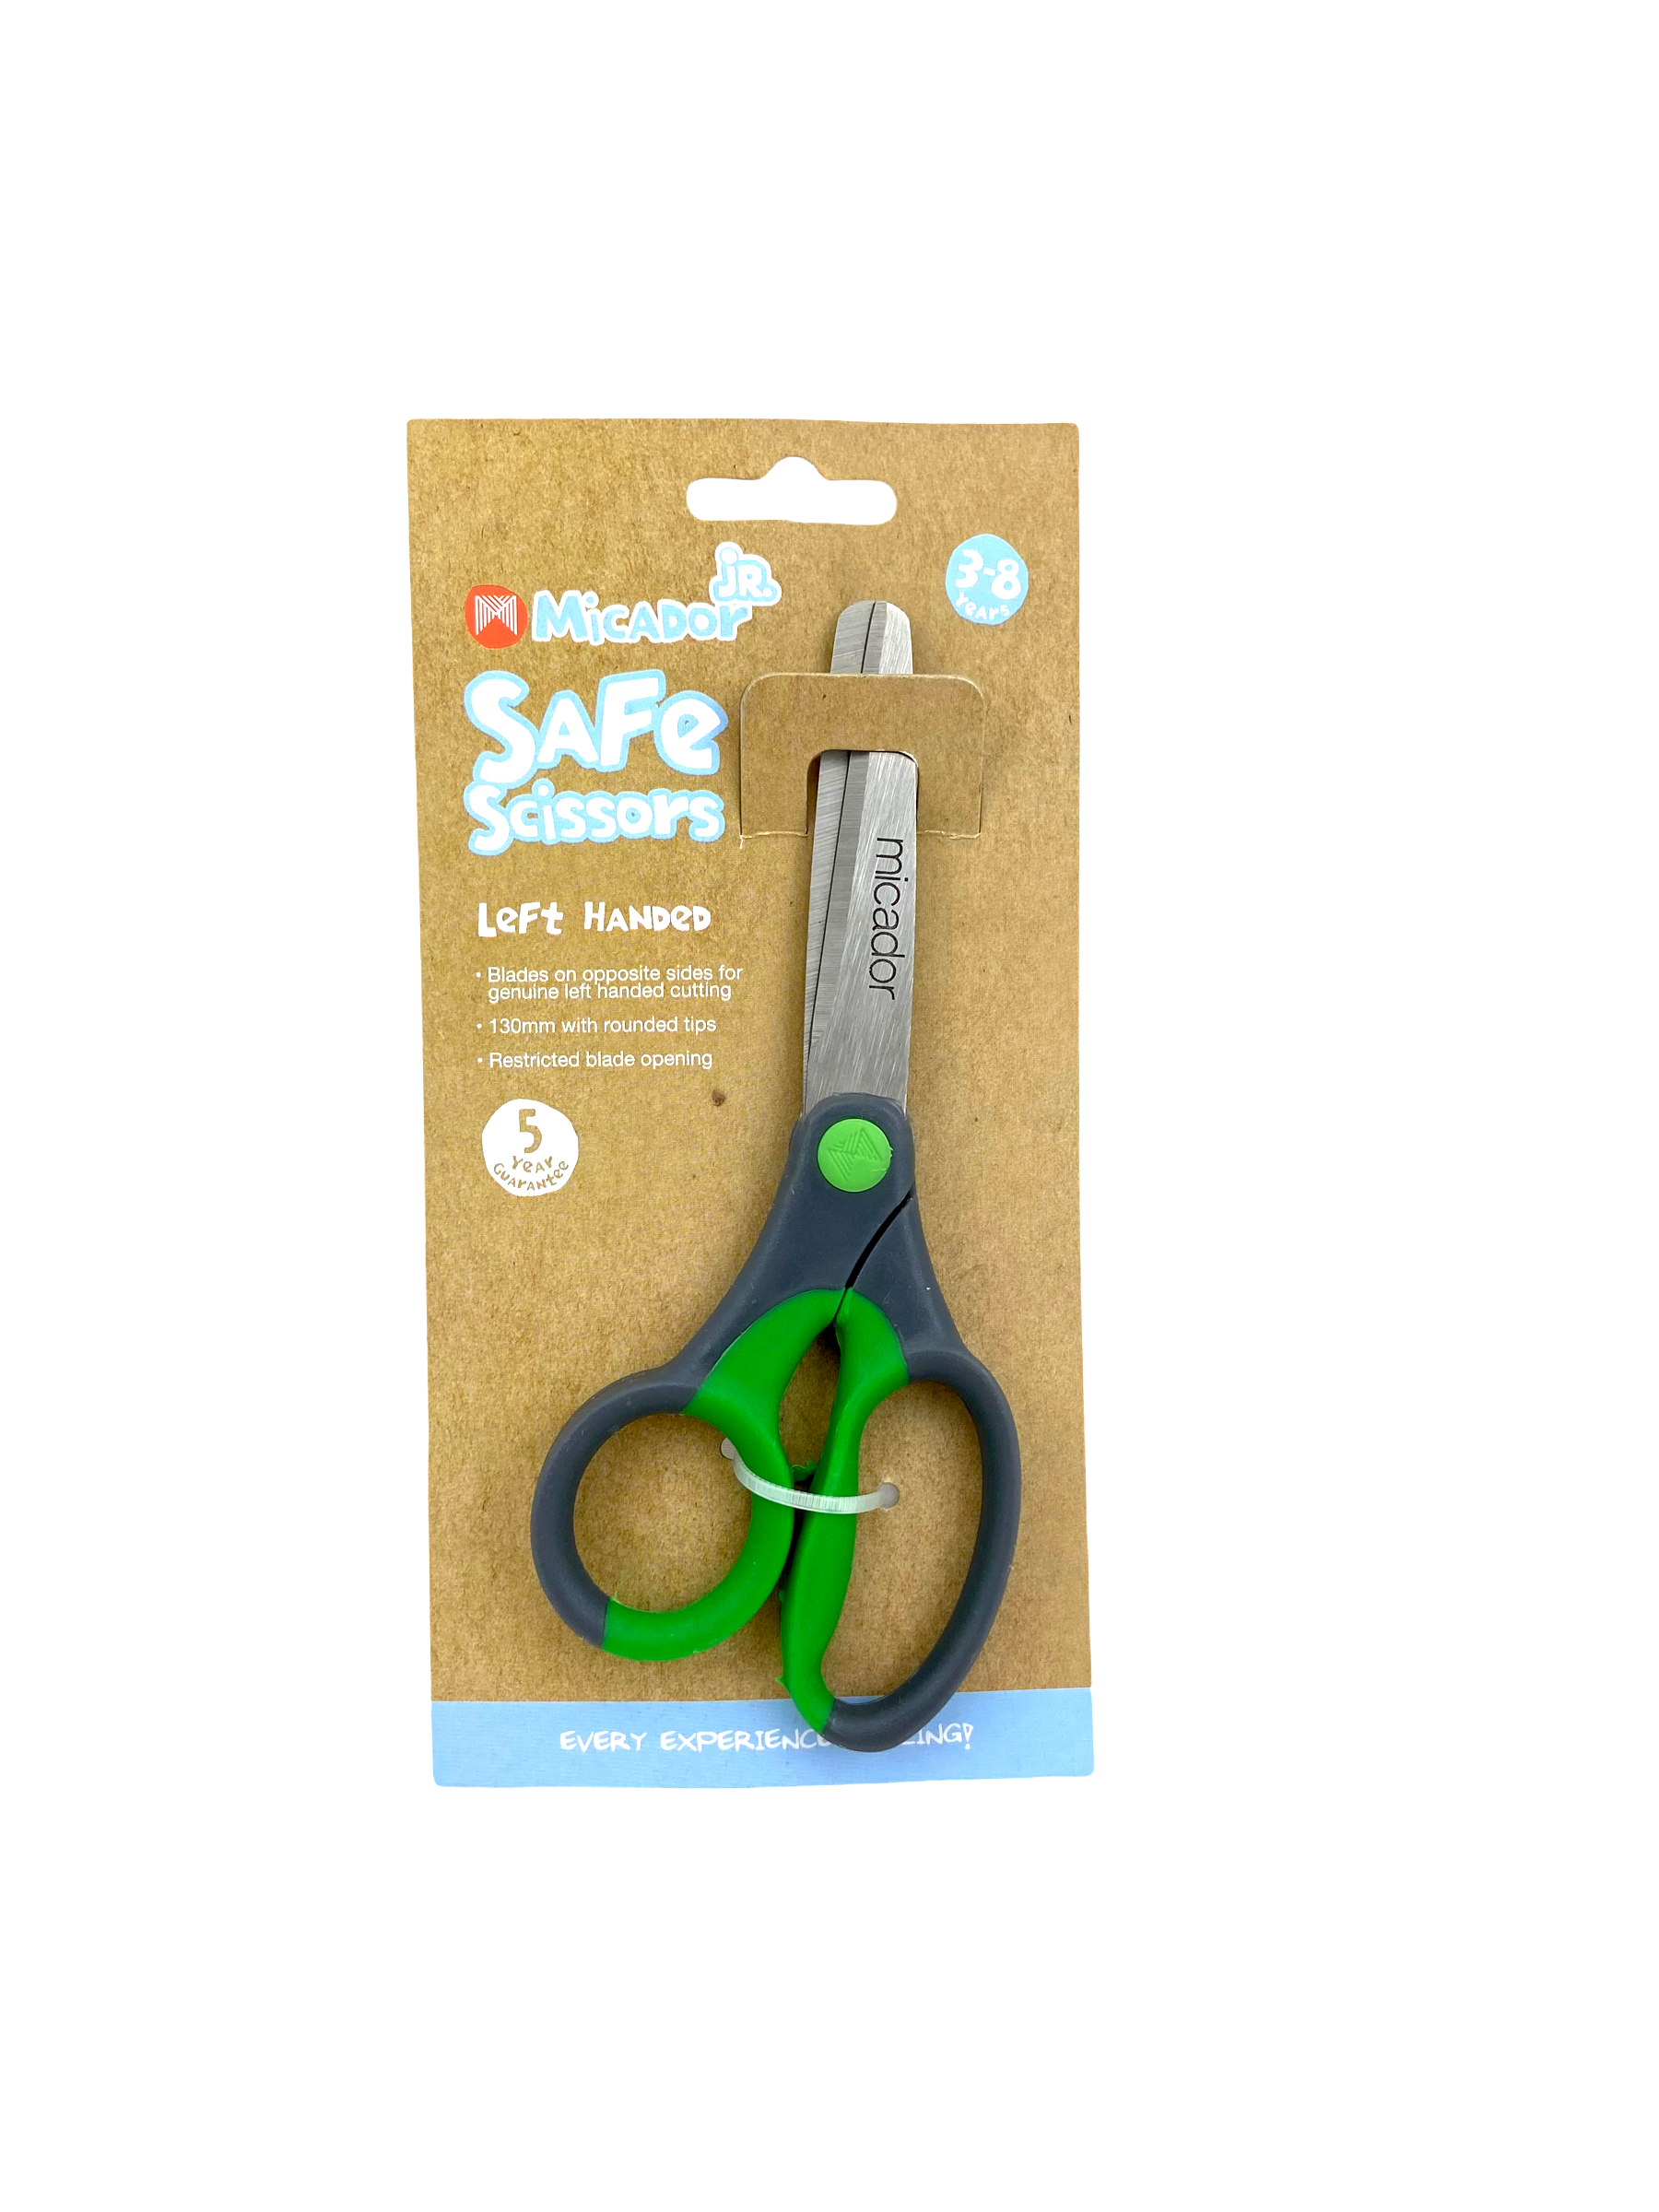 RIGHT Handed Childrens scissors with spring